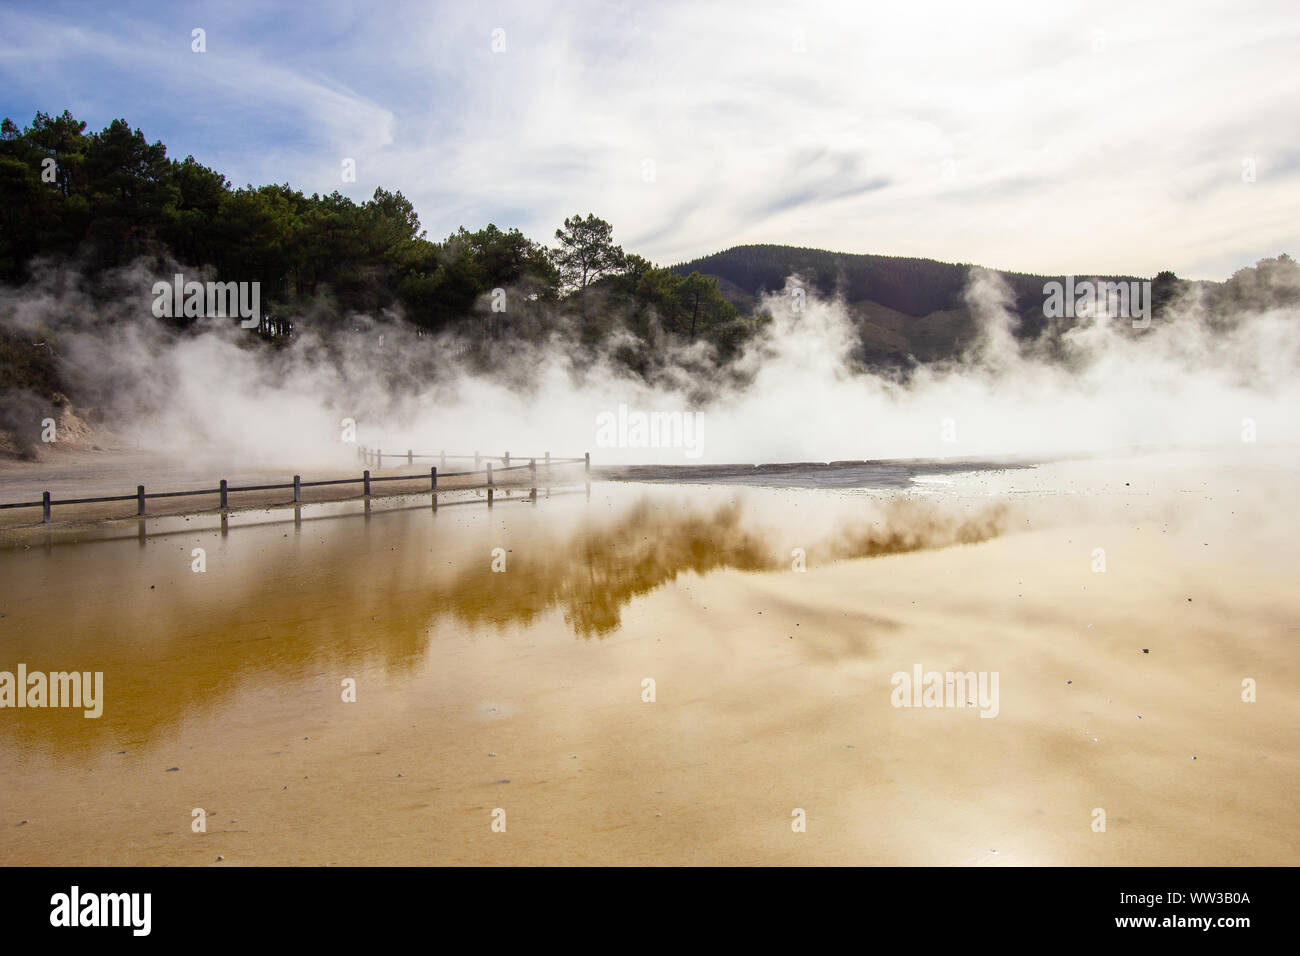 Champagne Pool in Wai-o-tapu an active geothermal area, New Zealand Stock Photo